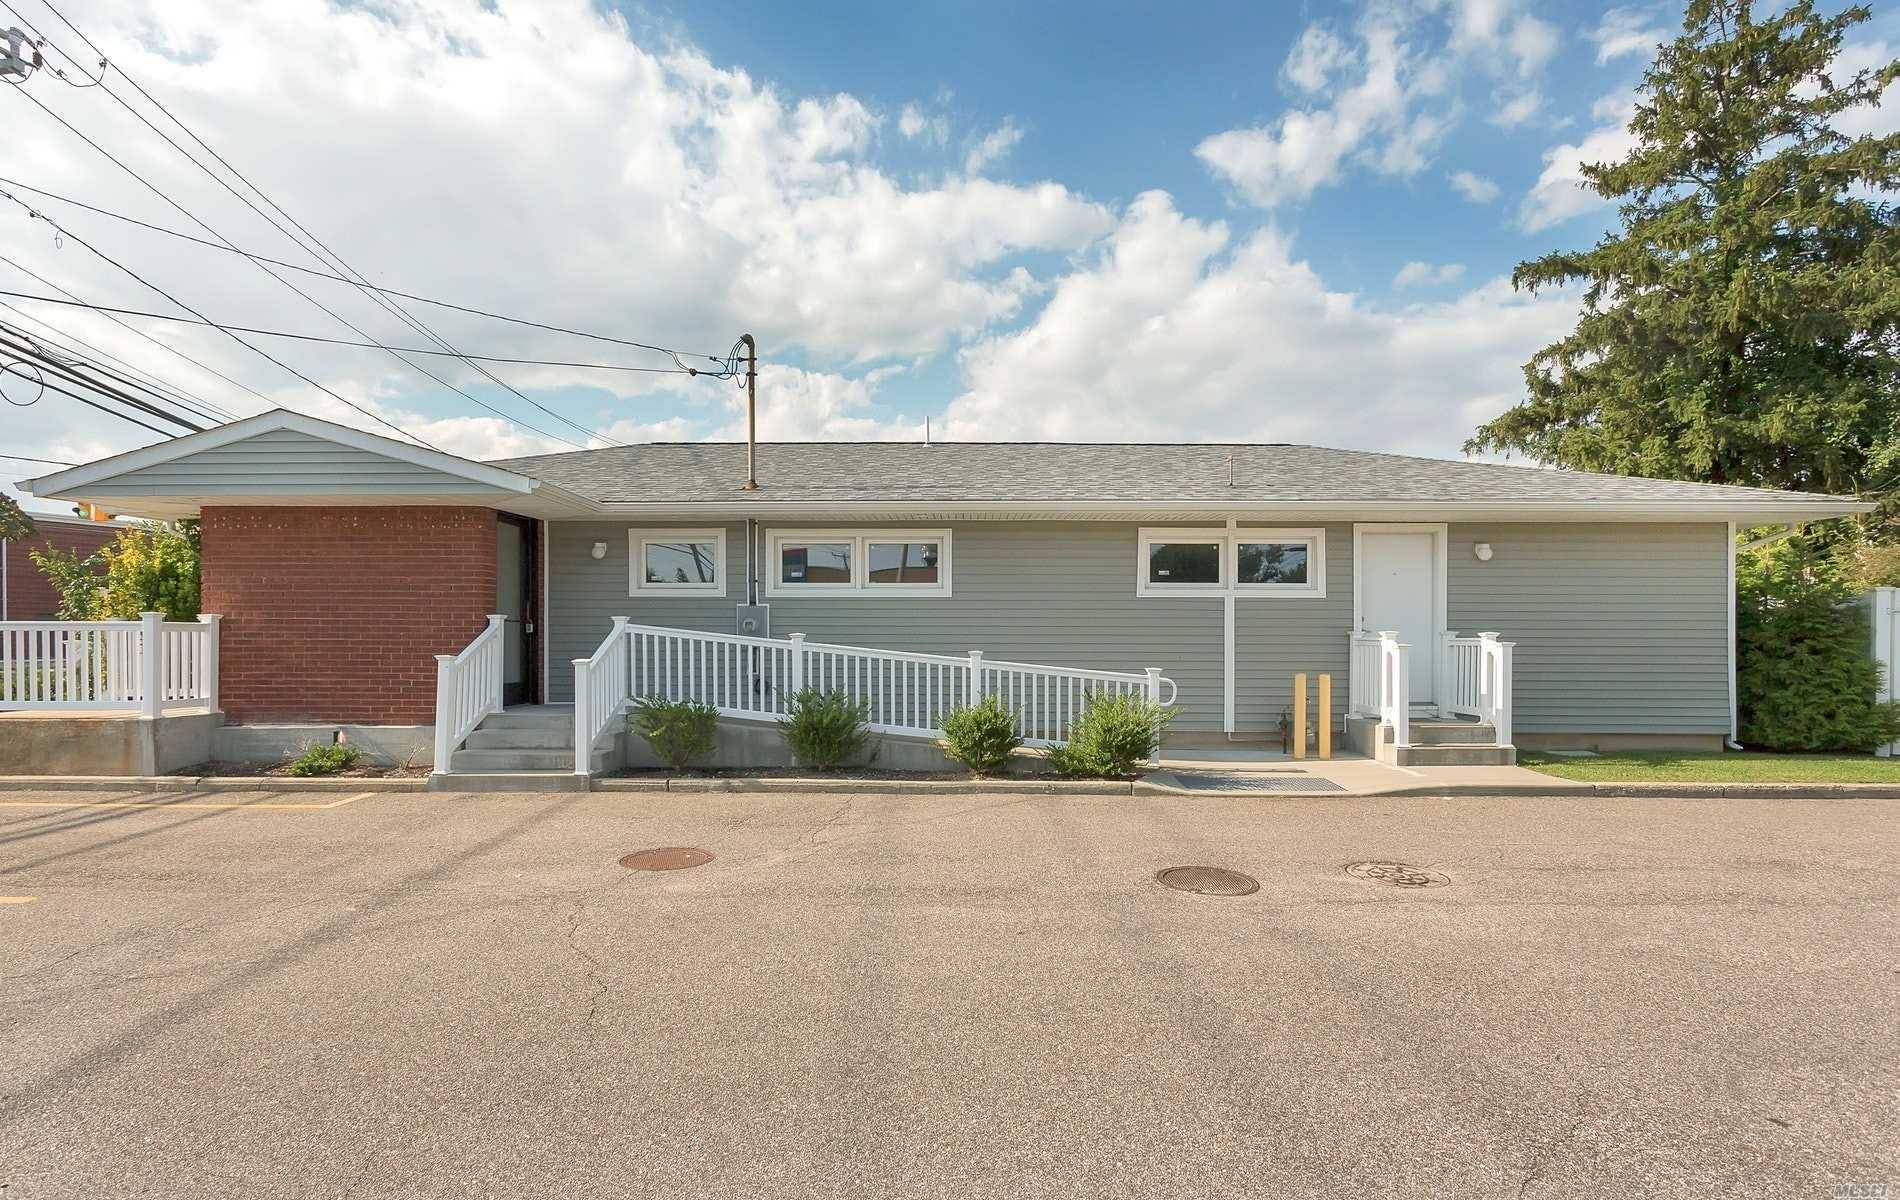 Completely Renovated Medical or Professional Office in Lindenhurst.